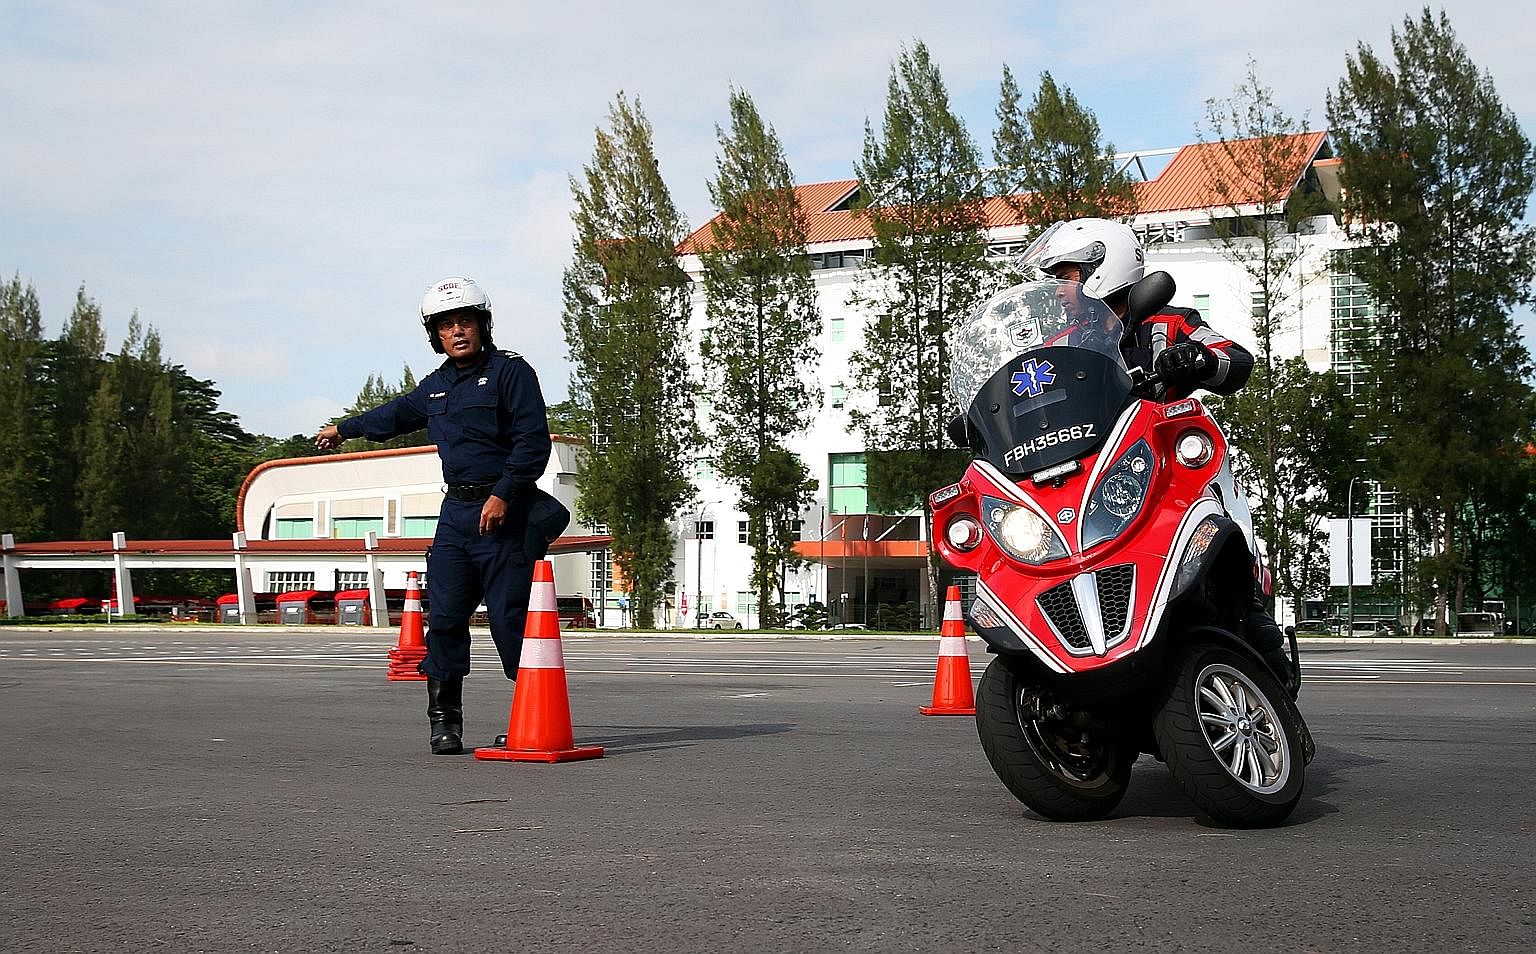 When a turnout occurs, firebiker Md Hilmi Md Fuad slides down a pole (left) to get to his three-wheeled scooter quickly. At the Civil Defence Academy in Jalan Bahar, firebikers like Staff Sergeant Hilmi are required to go through a riding course to b